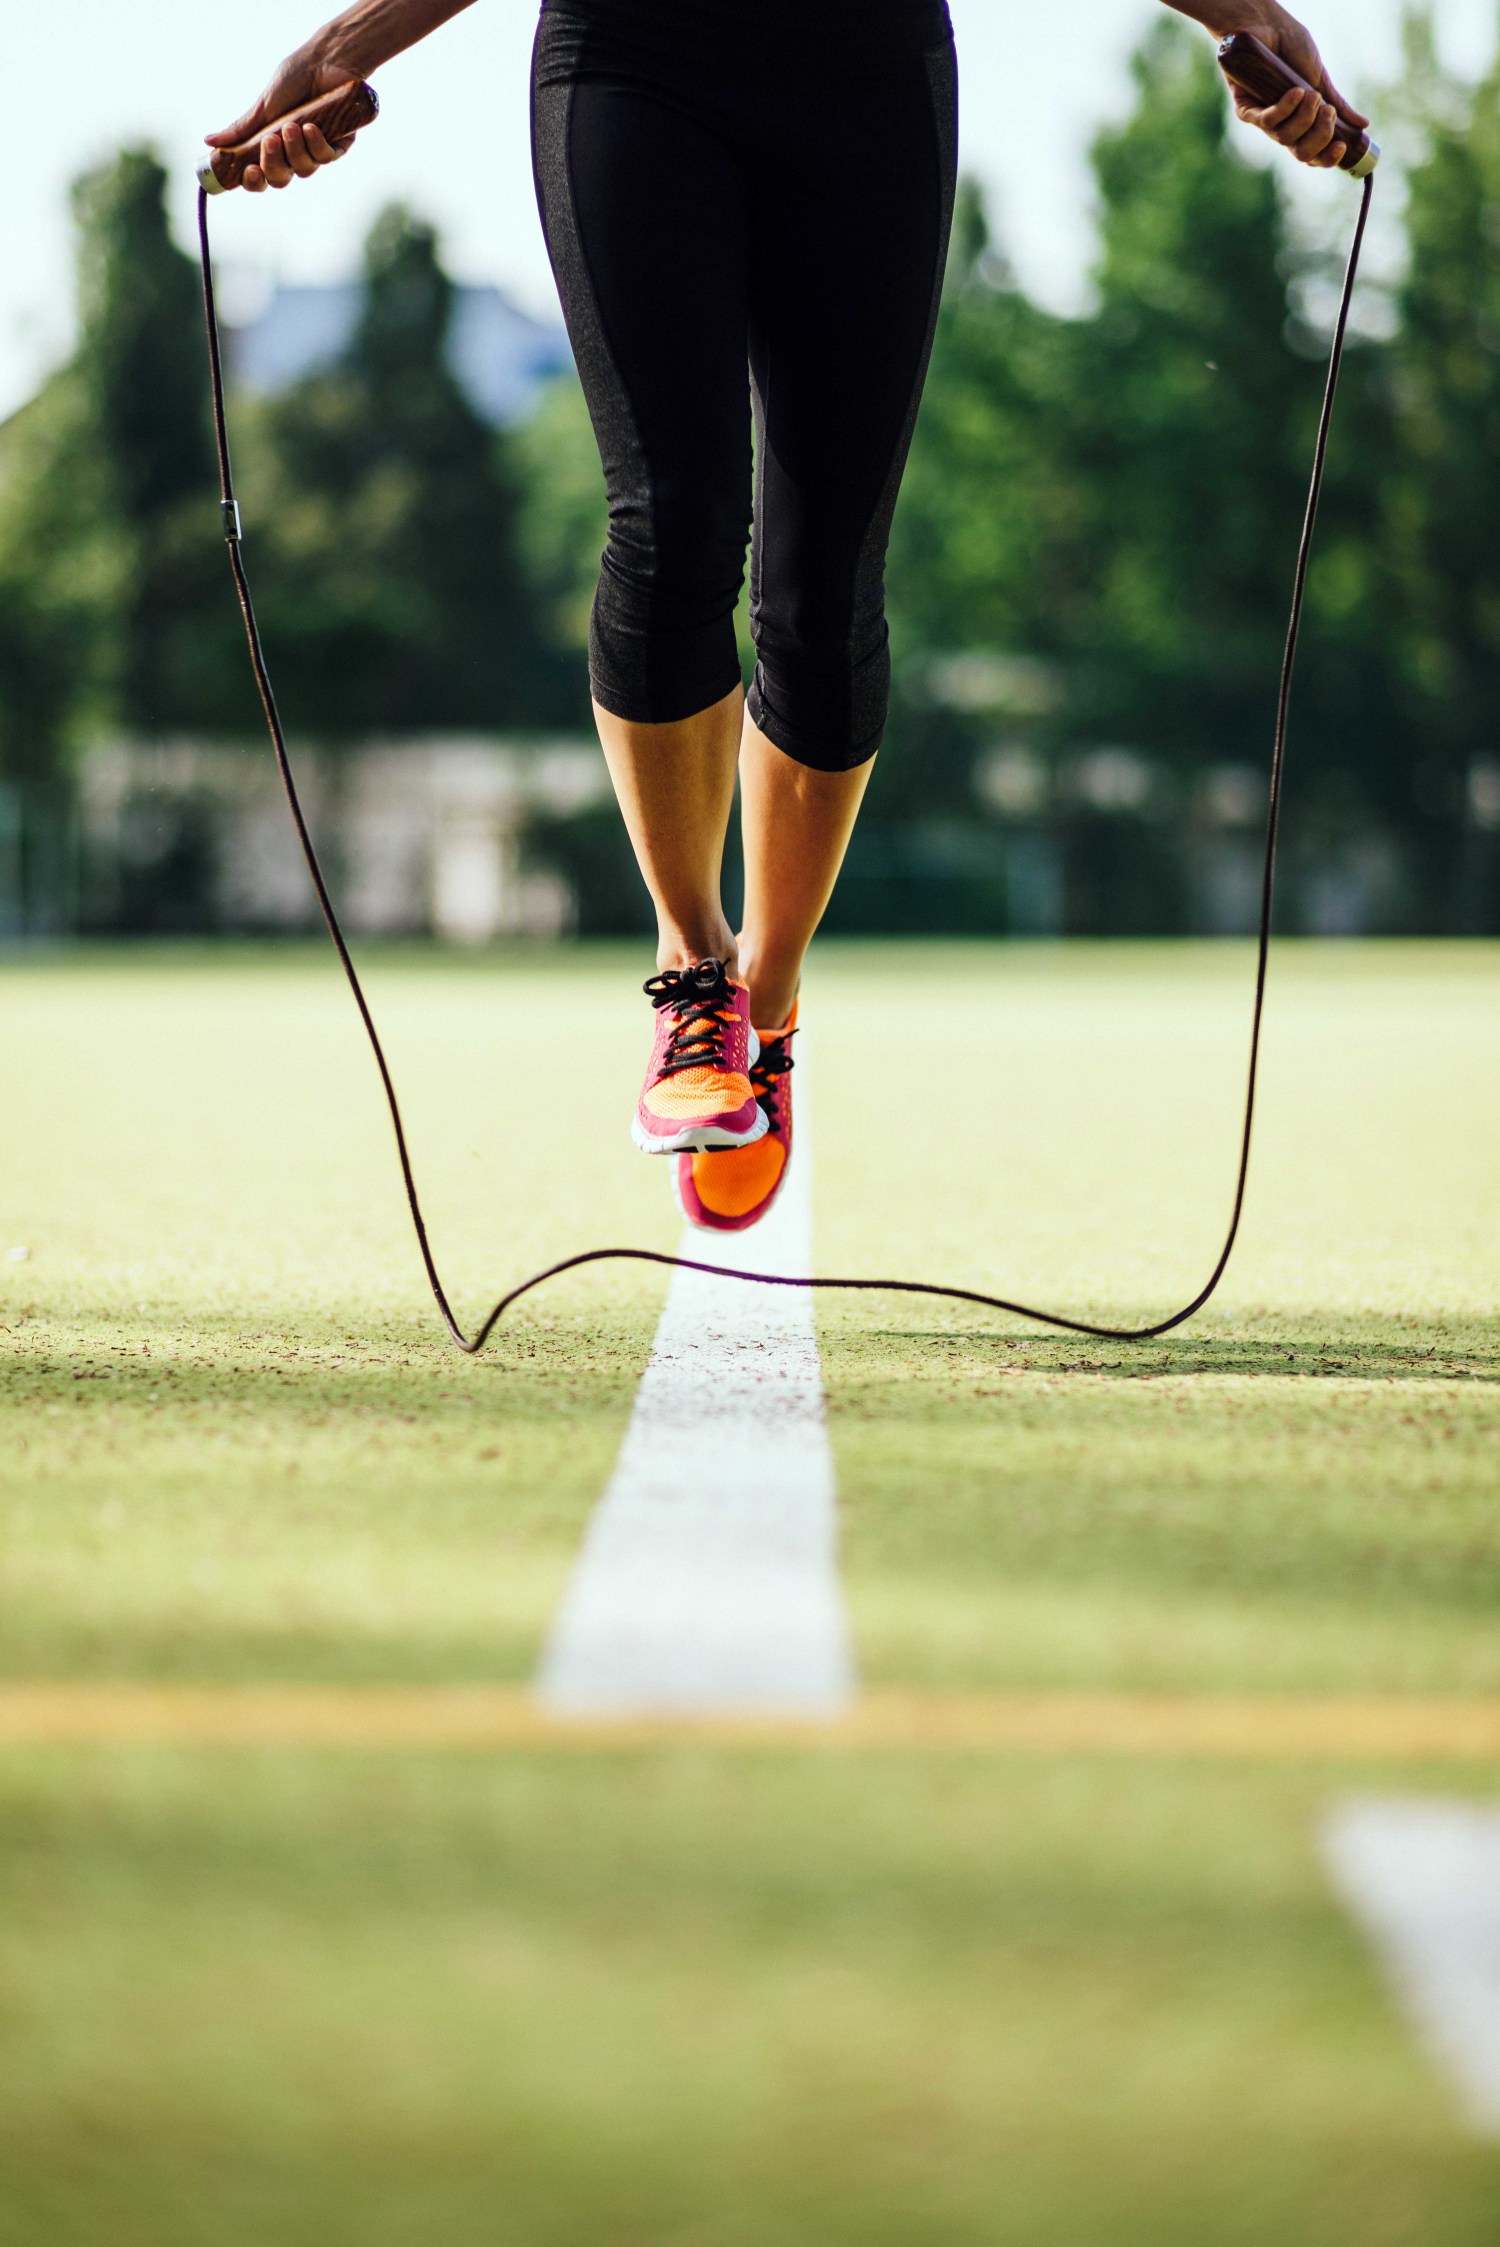 How to Jump Rope in 4 Easy Steps: Jump Rope Workouts